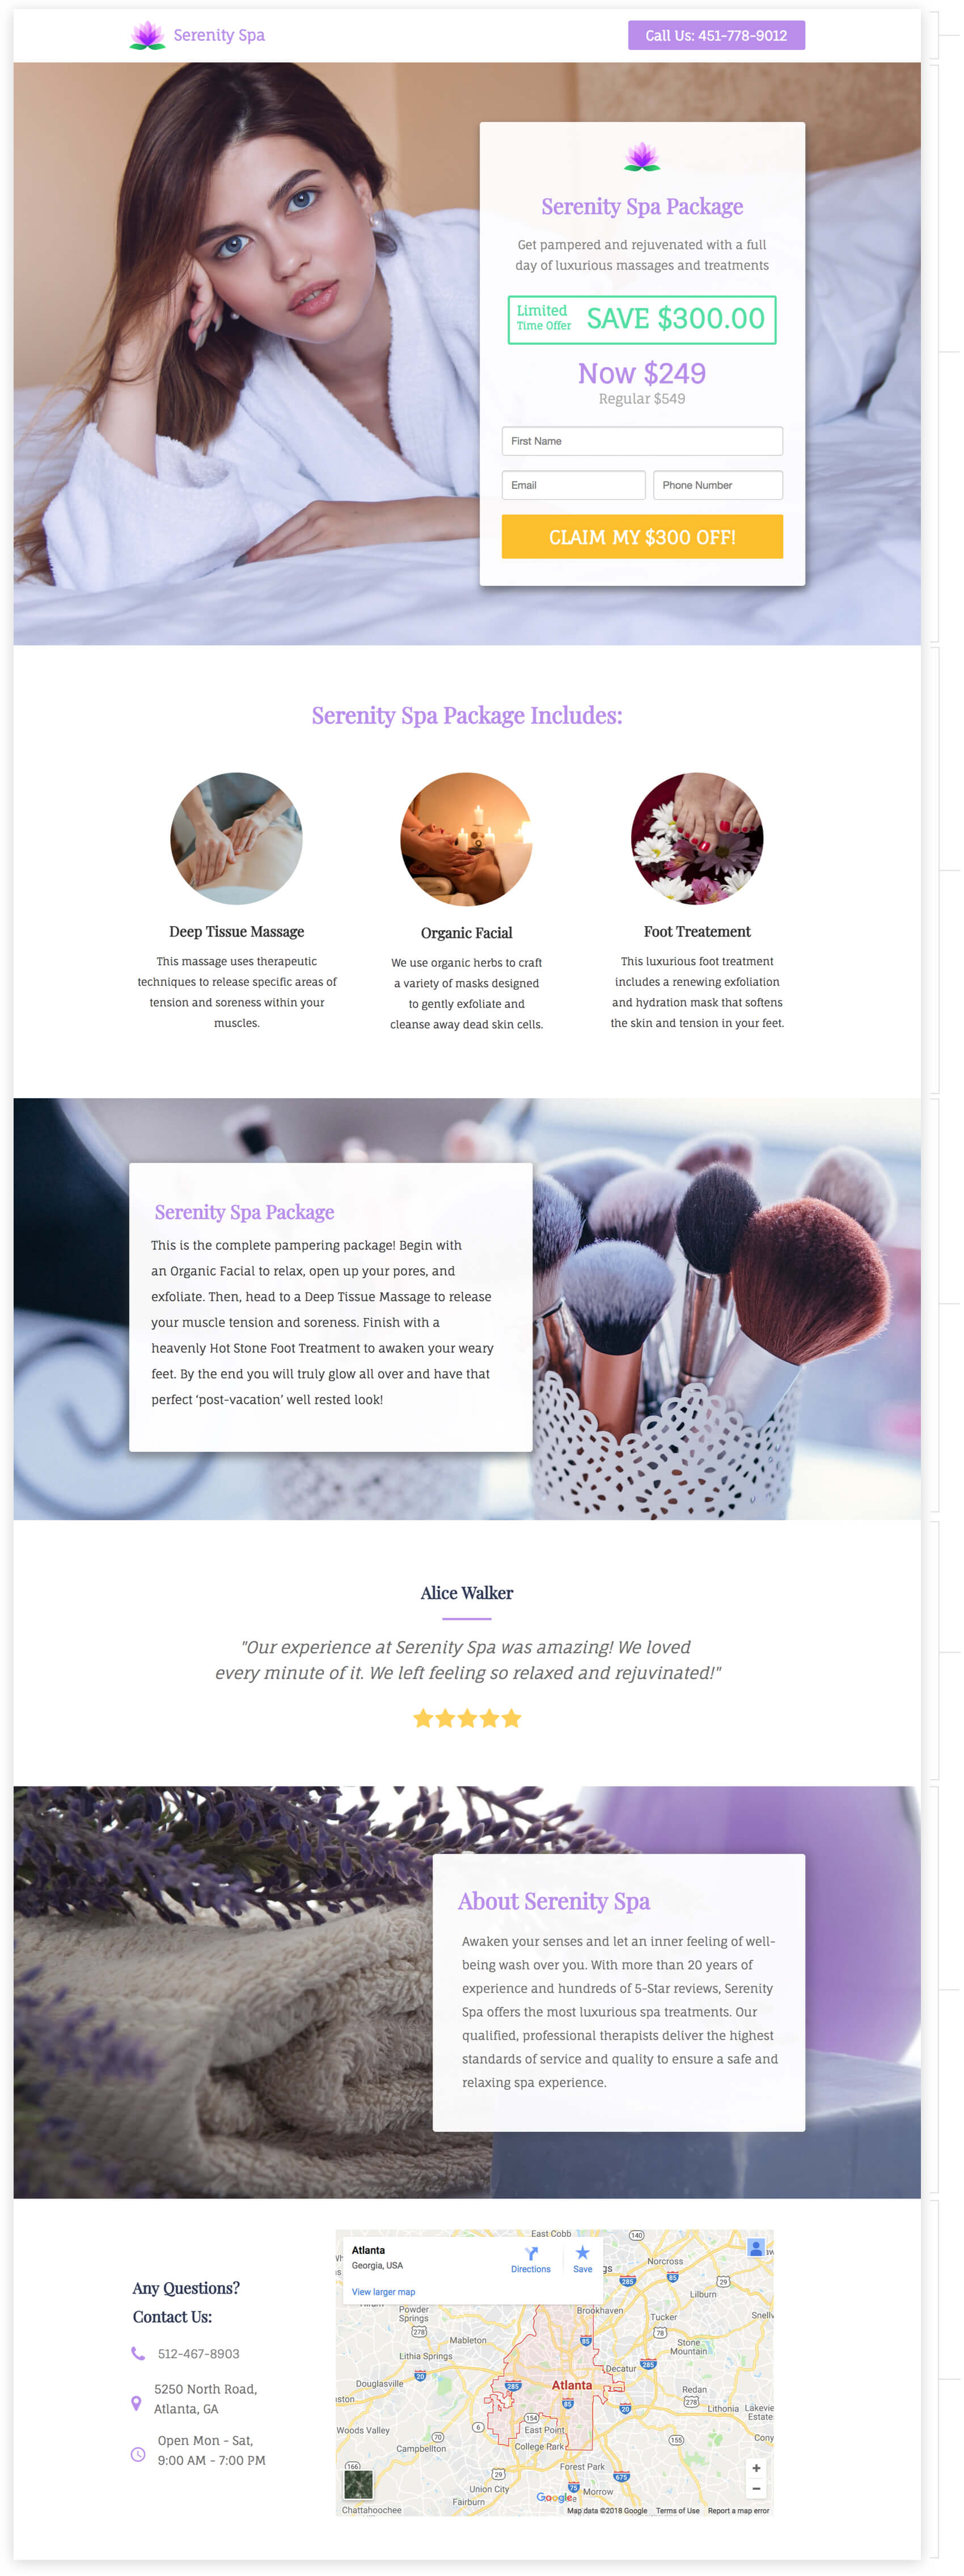 limited-time spa package offer landing page